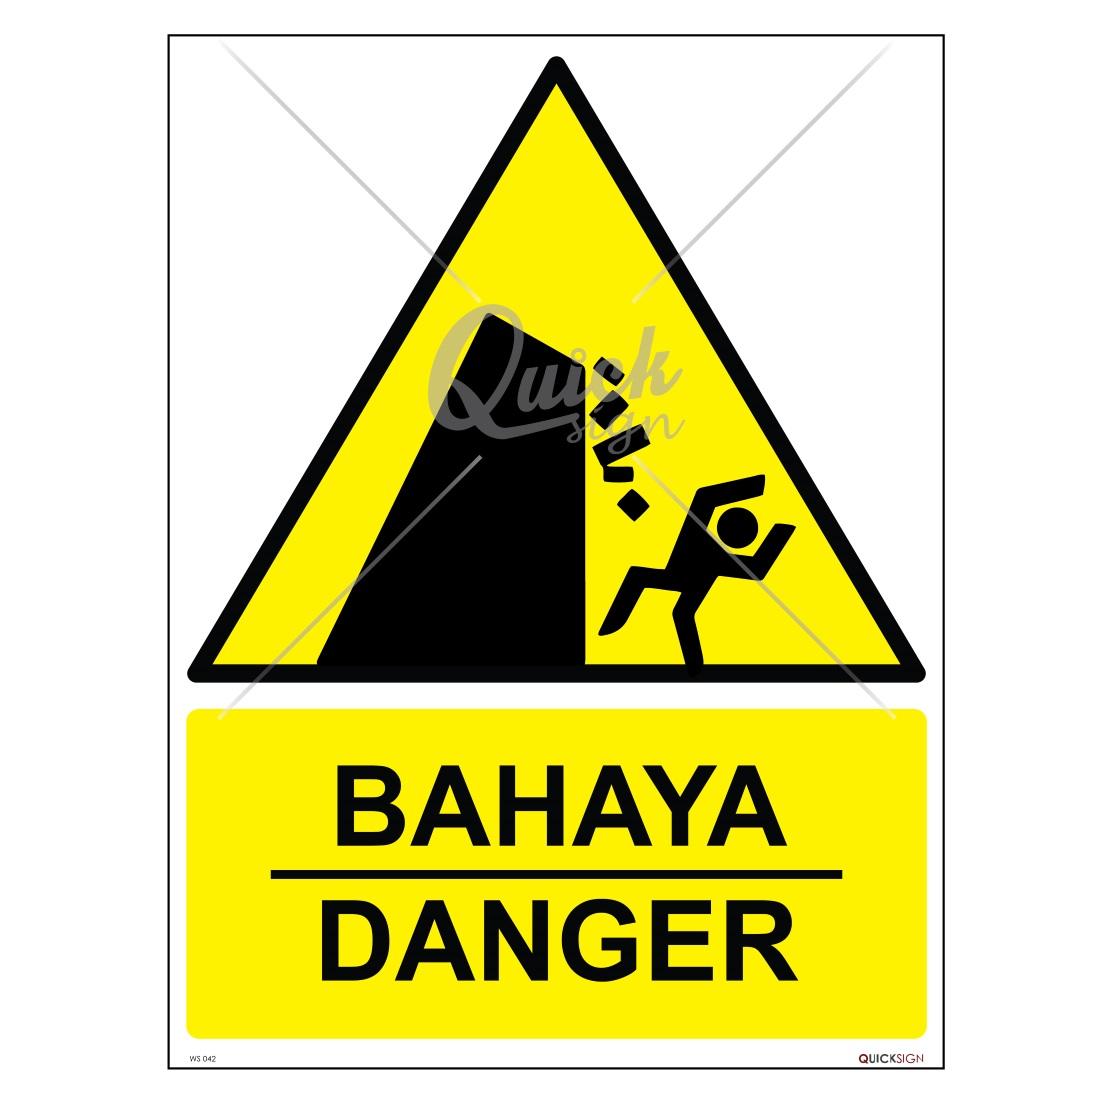 Falling For Danger Ch 20 WS042 - Danger Falling Rocks Signage - Safetyware Sdn Bhd